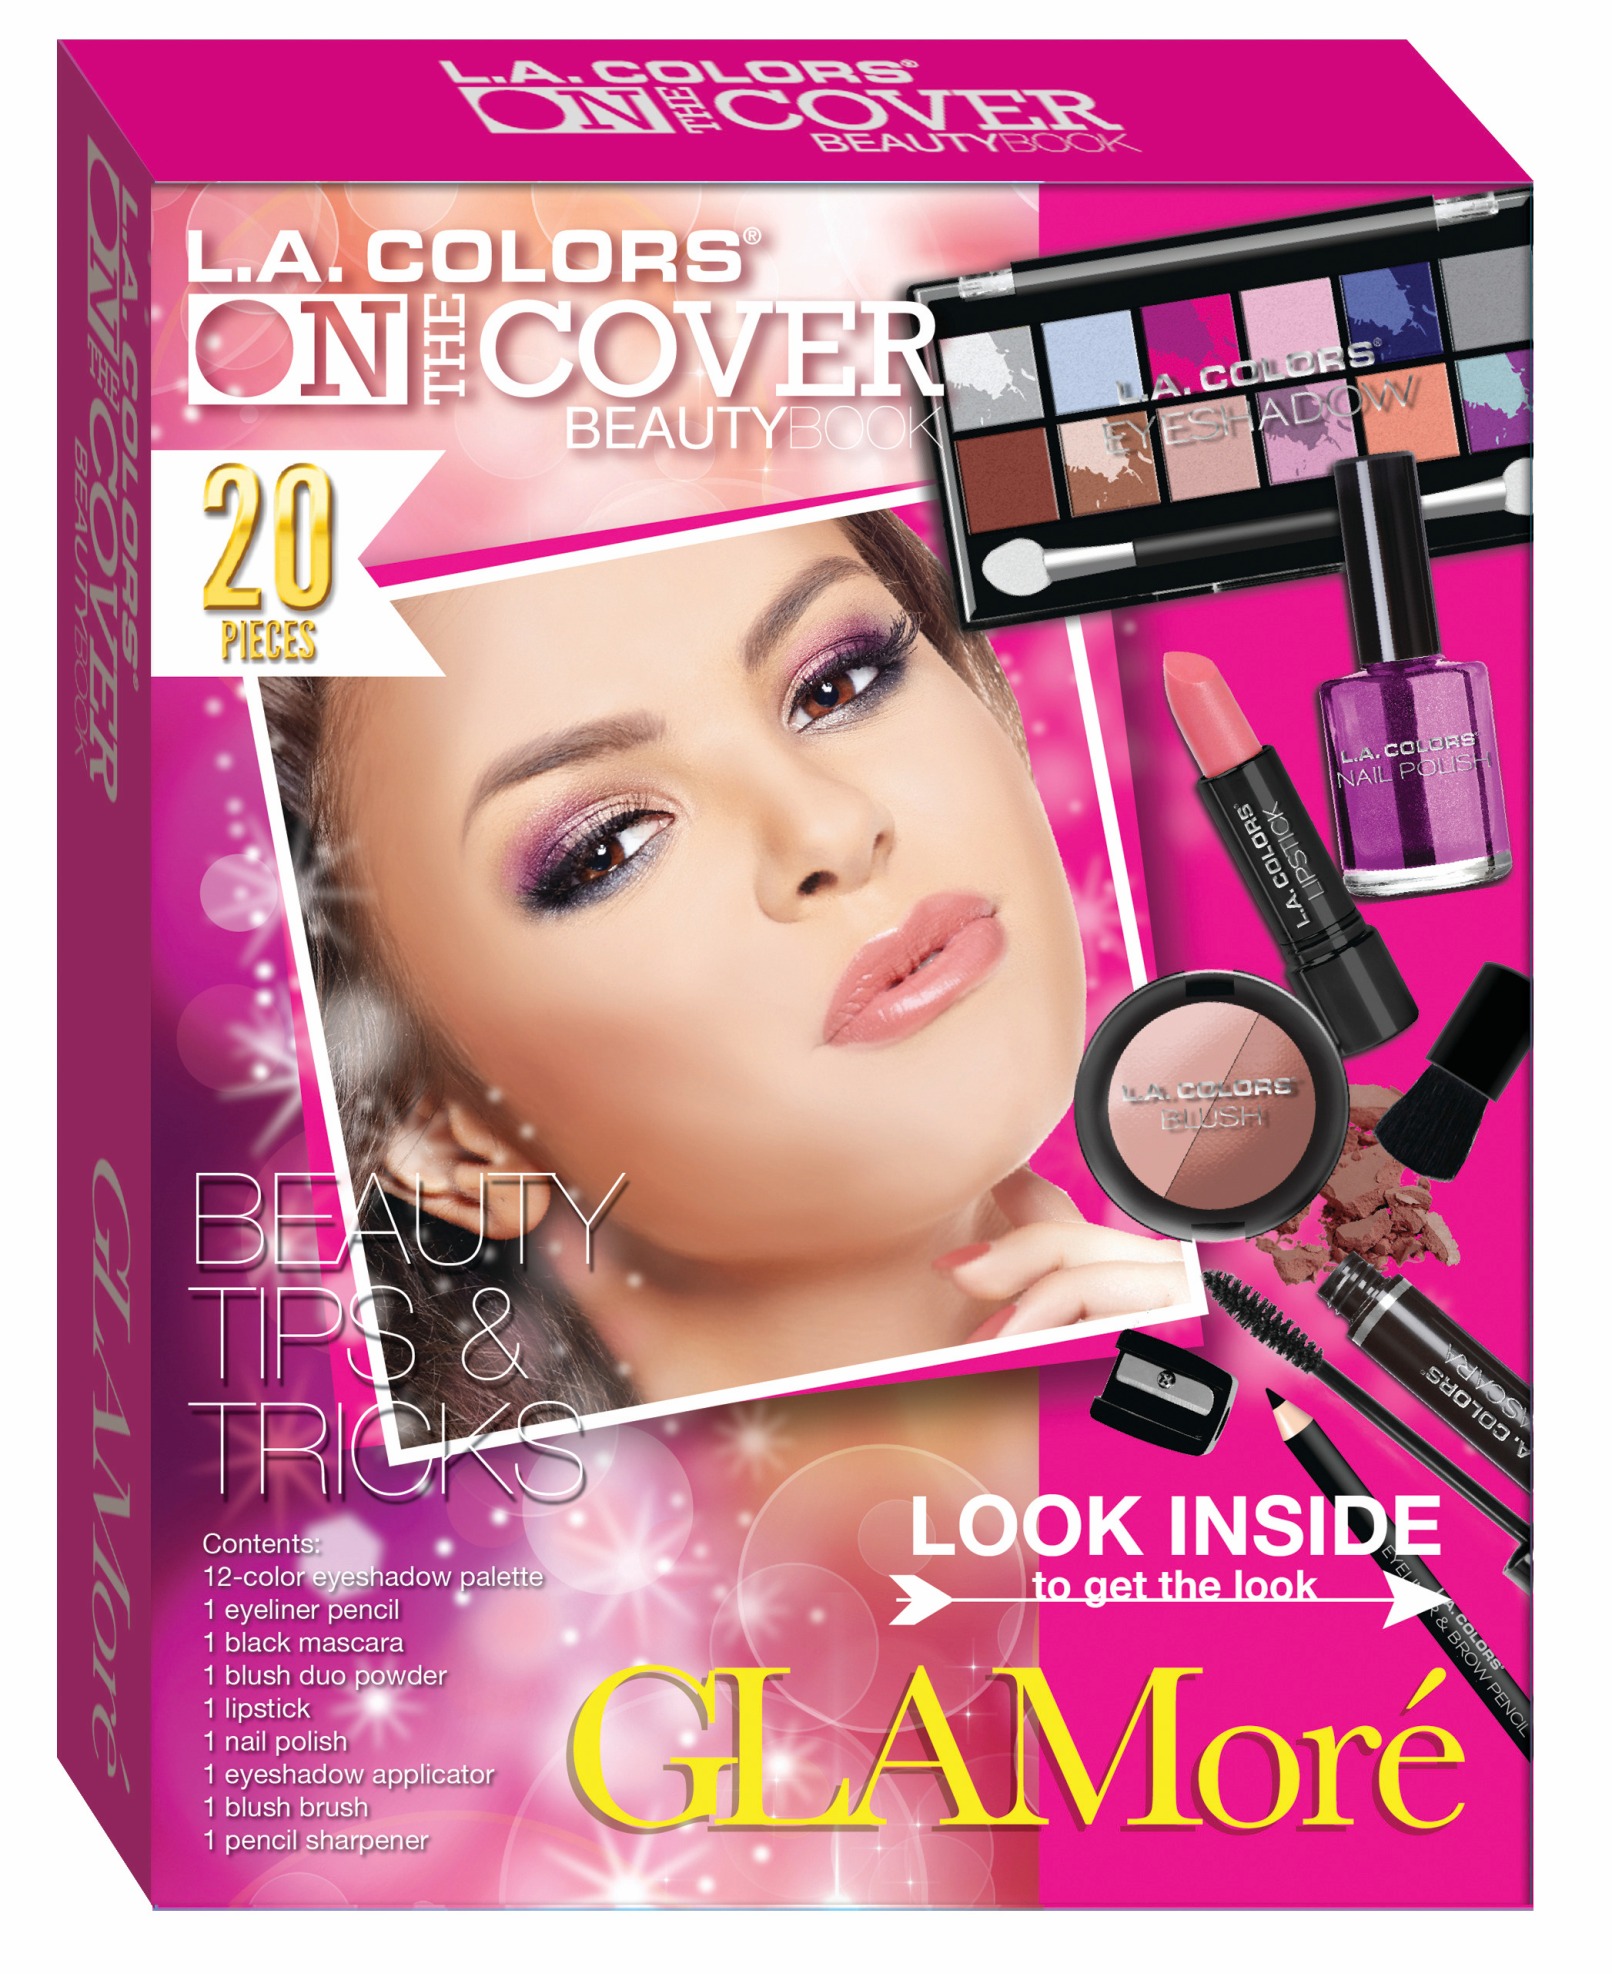 L.A. Colors On the Cover Beauty Book 20 pc Makeup Set GLAMore Tips & Tricks  0.35 Oz.